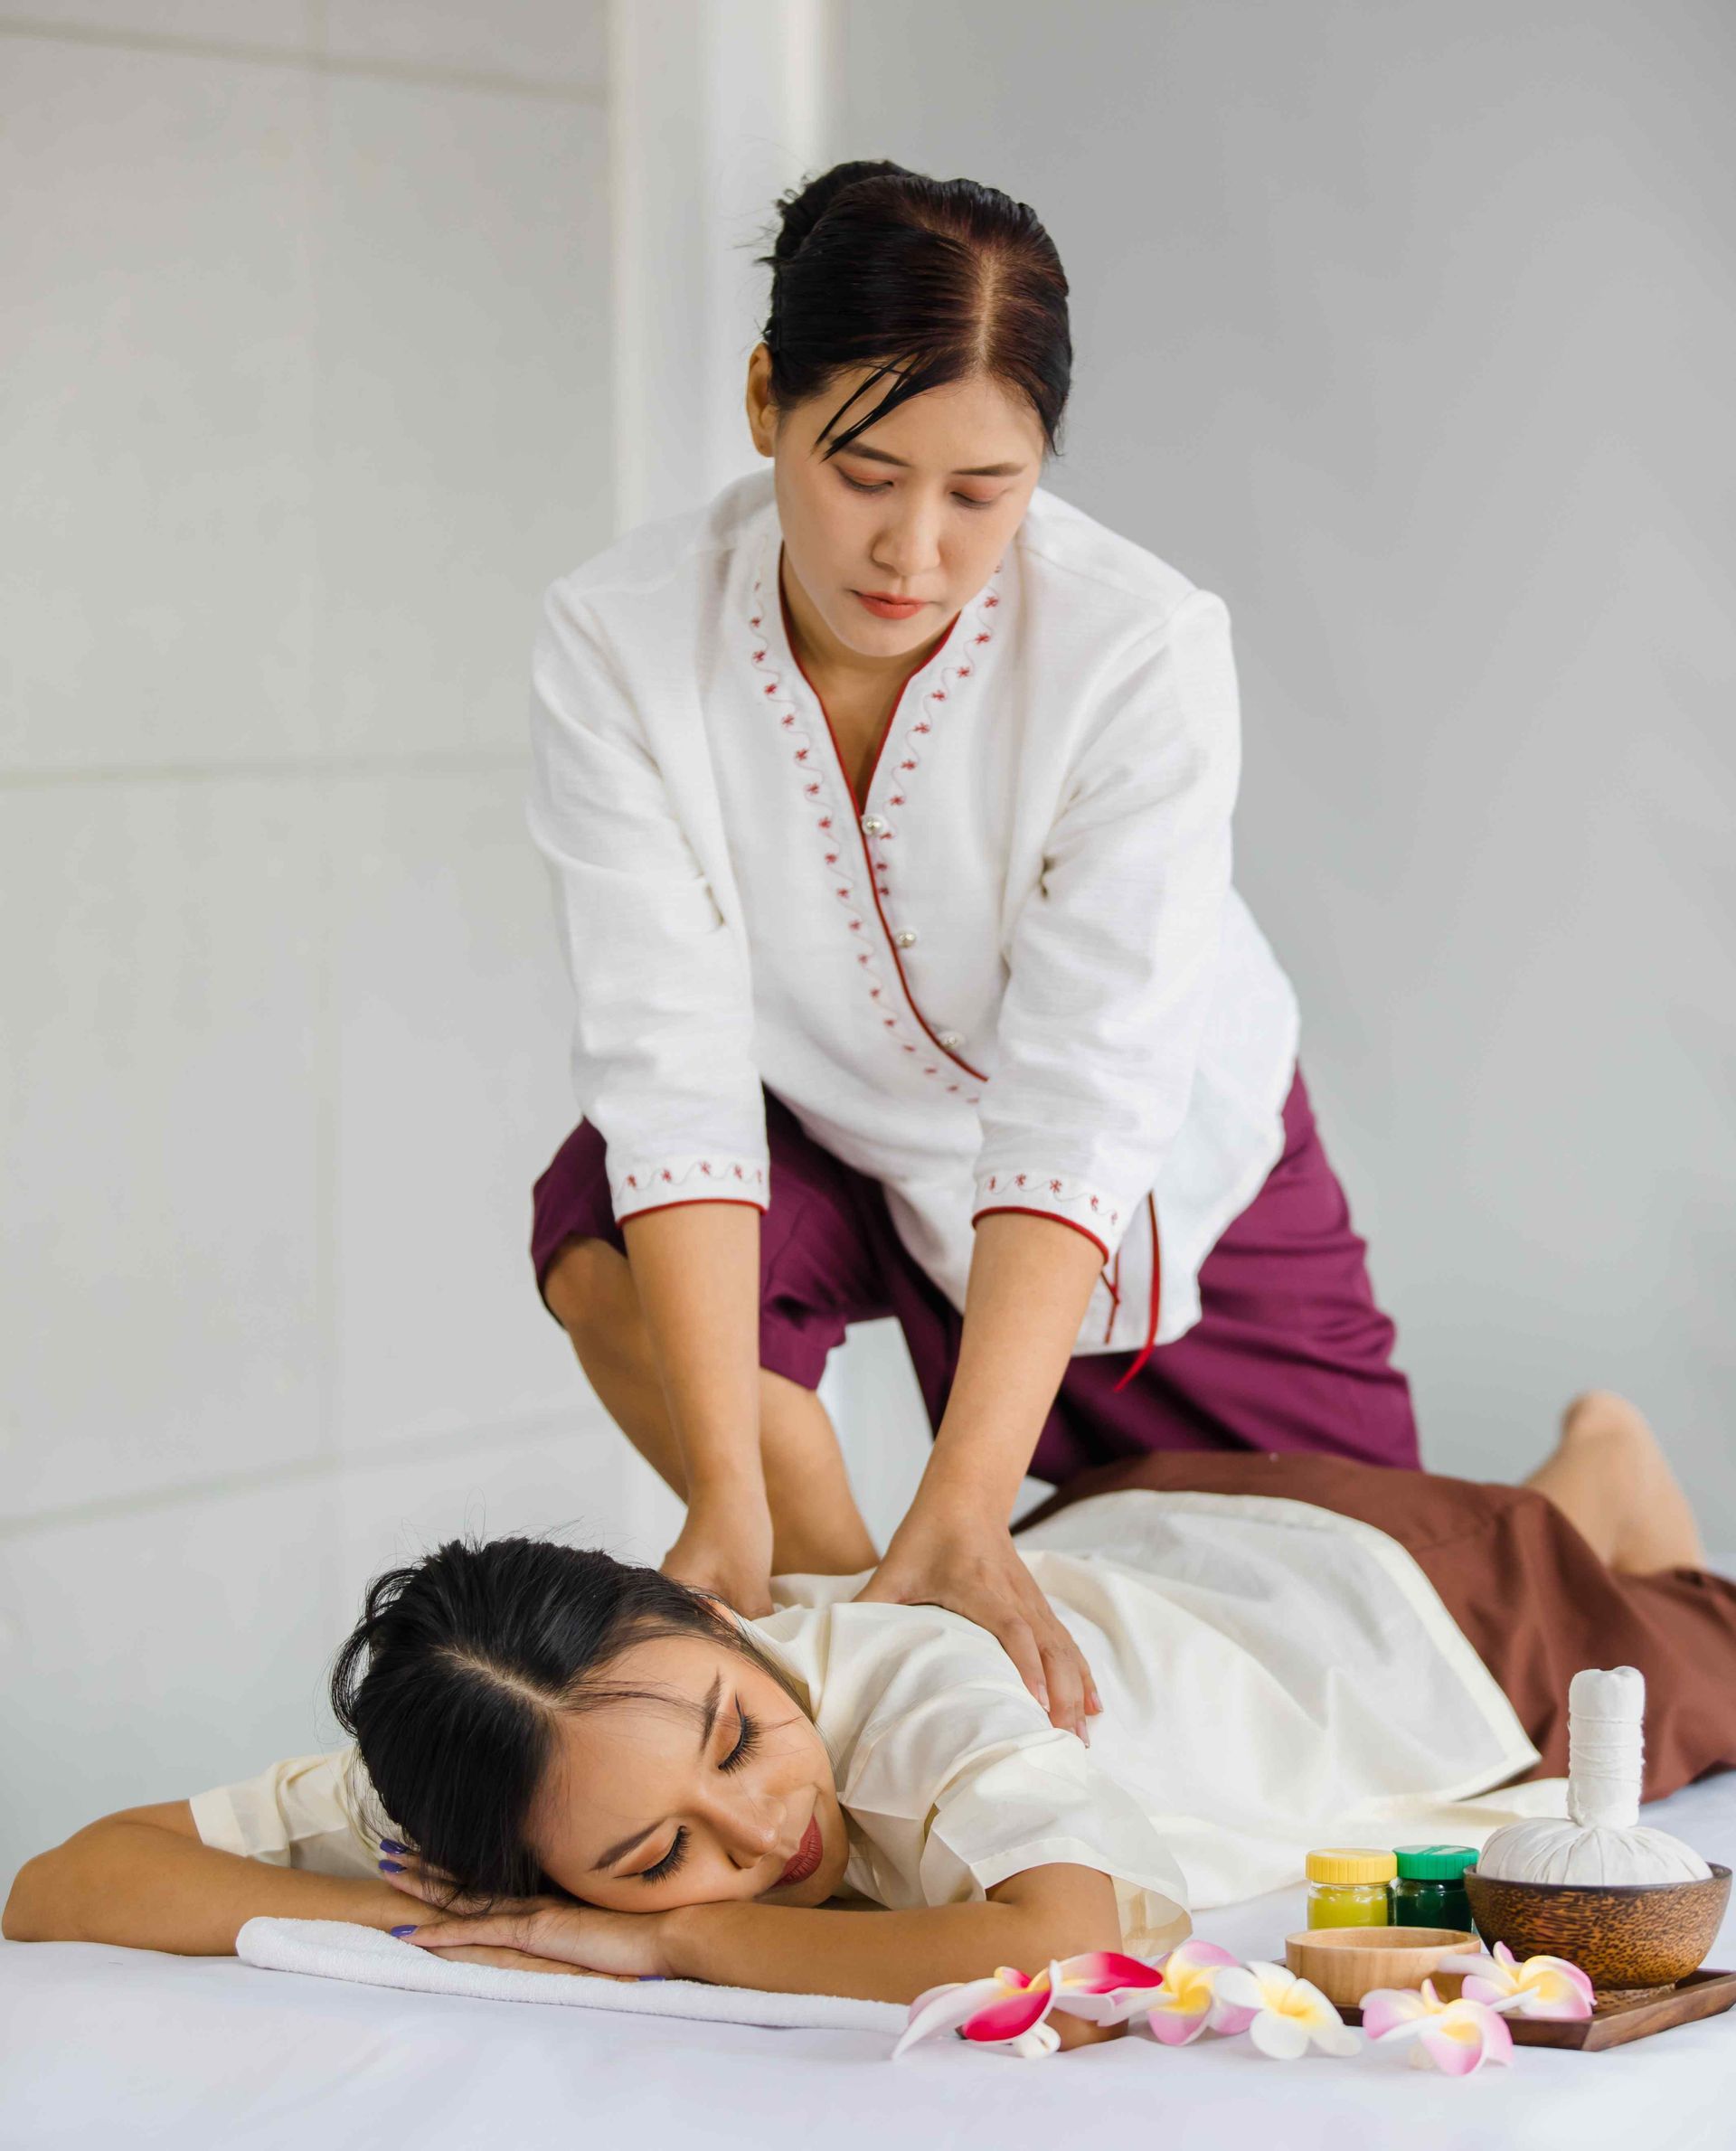 Massage Therapist using two hands to massage the upper back